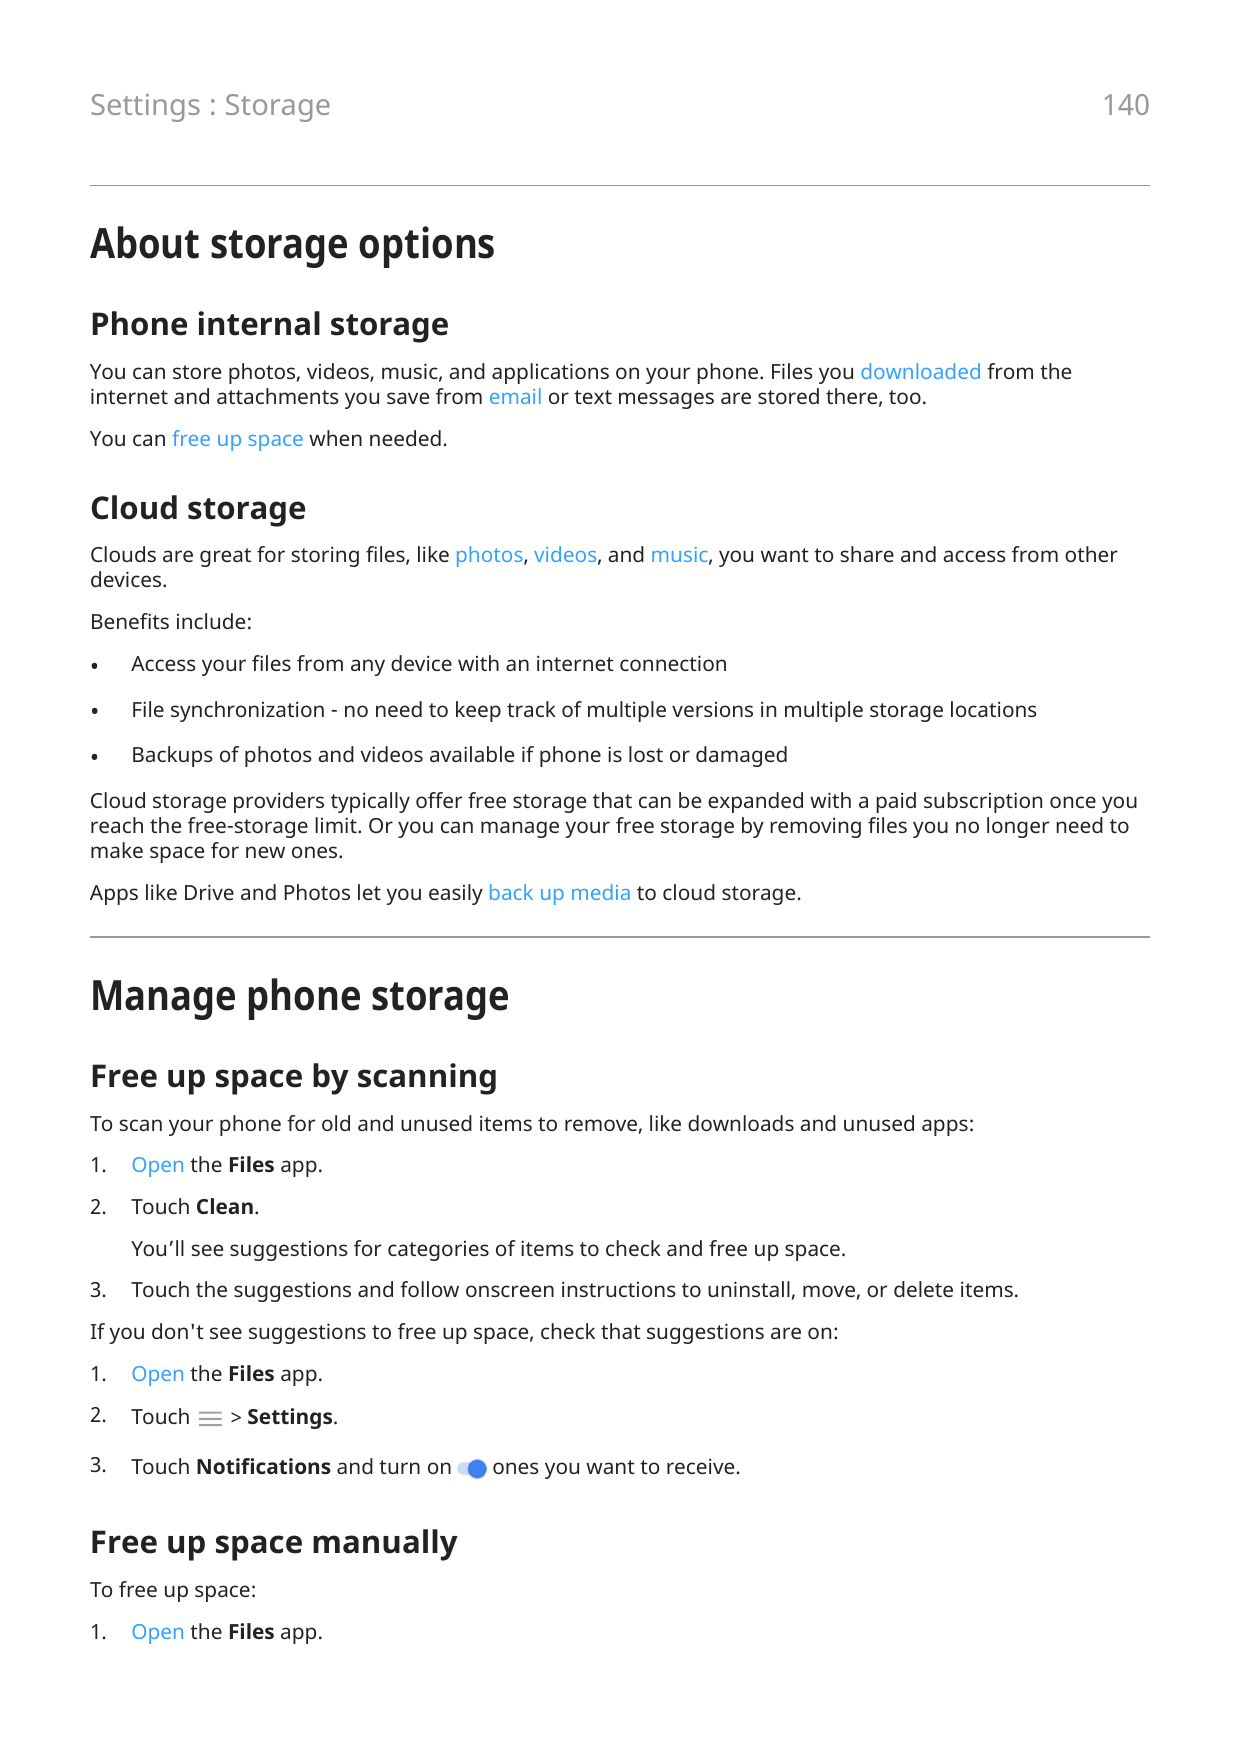 140Settings : StorageAbout storage optionsPhone internal storageYou can store photos, videos, music, and applications on your ph